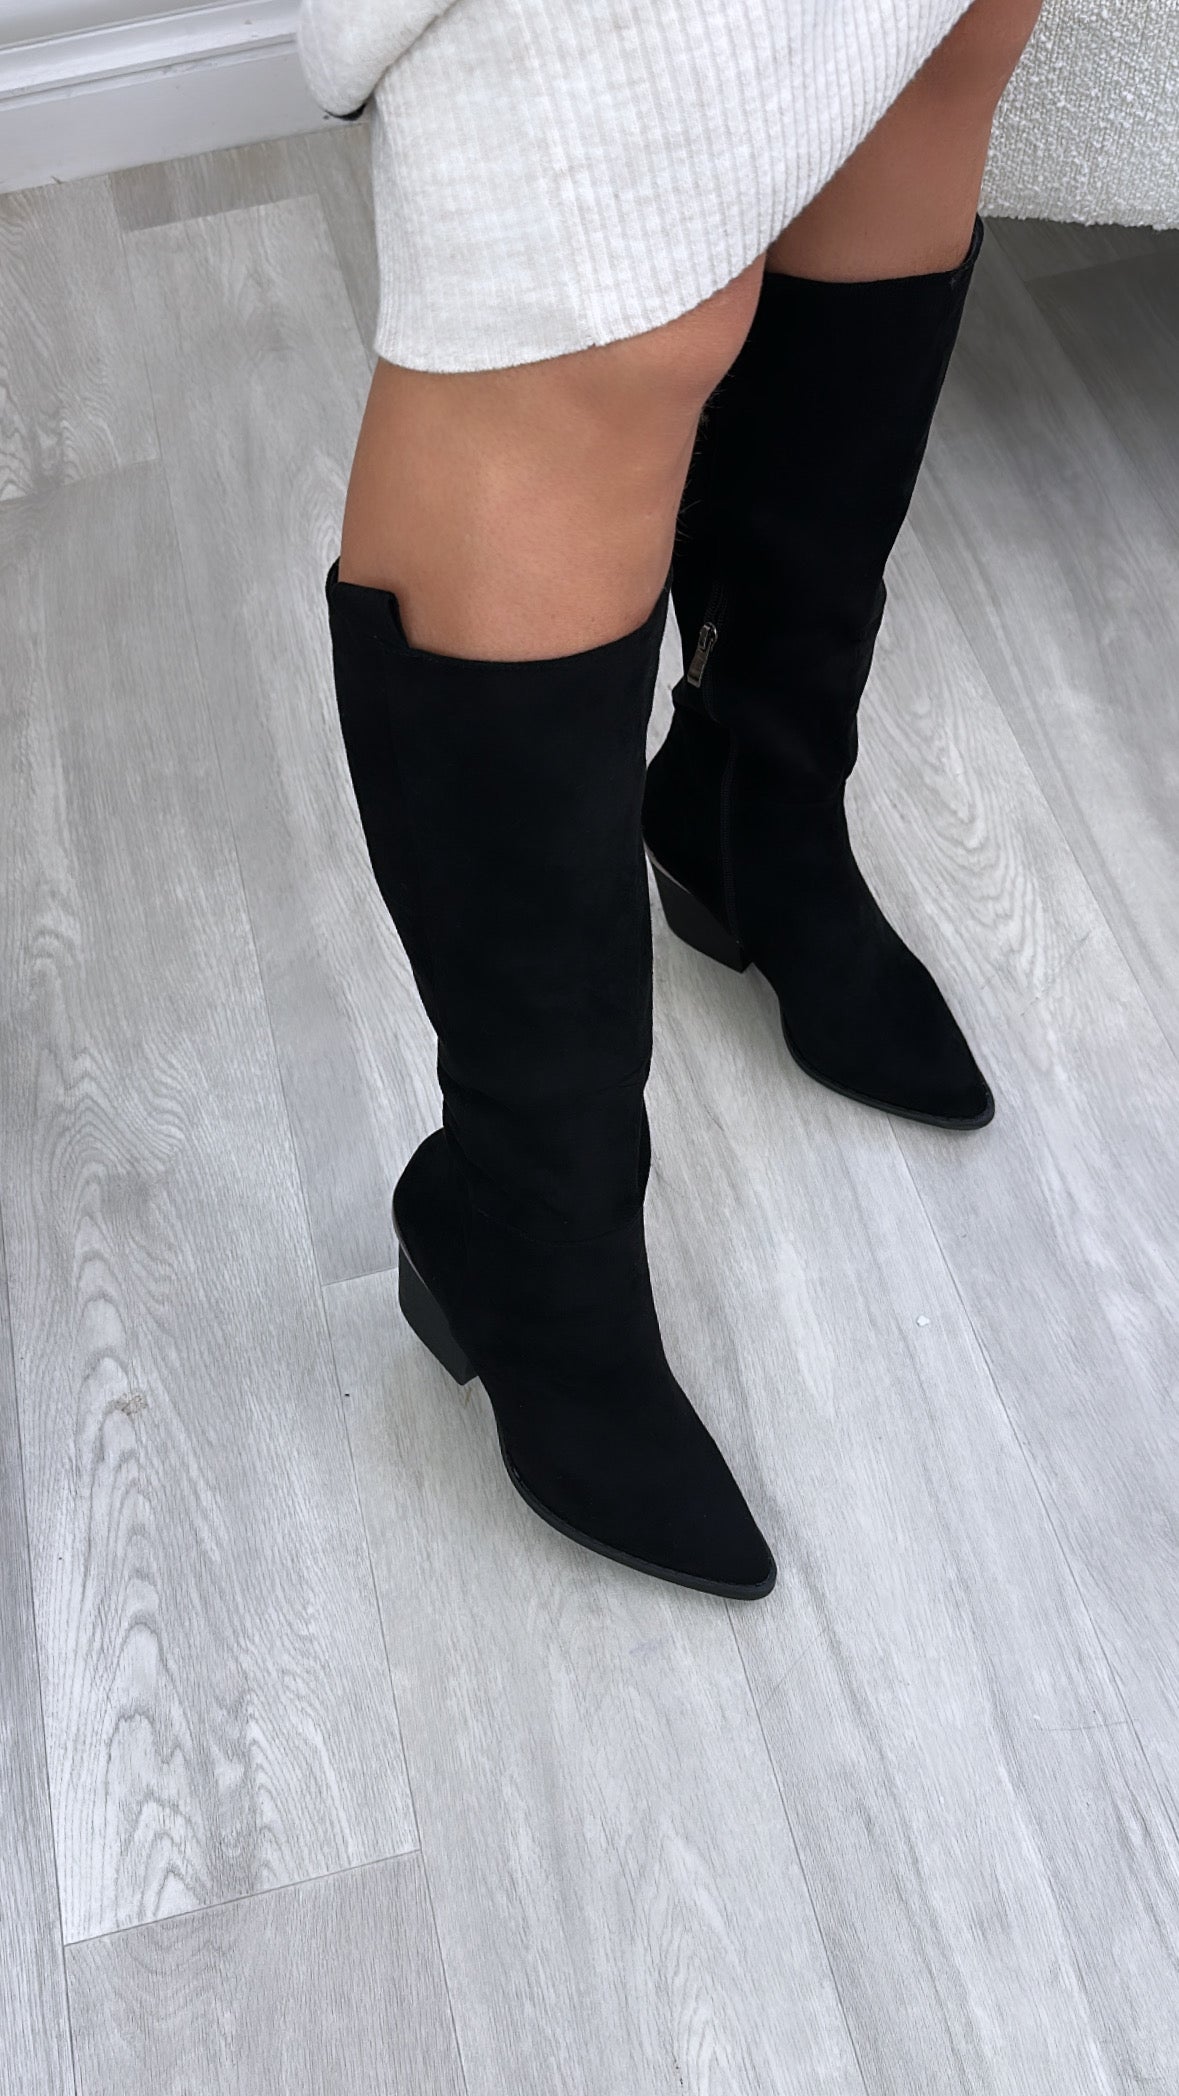 Marion Black Knee High Boots